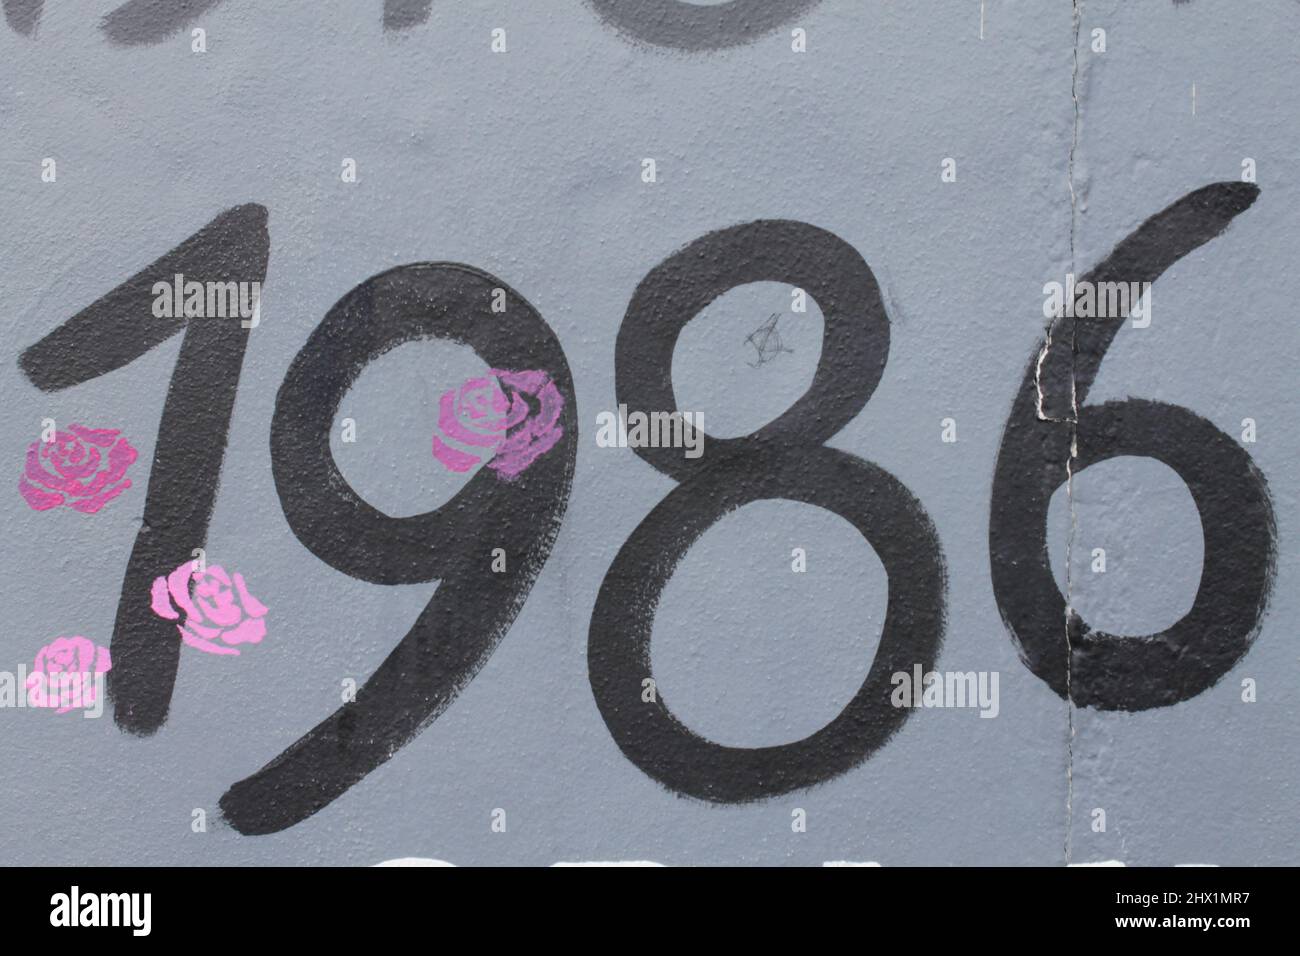 1986, on the Berlin Wall Stock Photo